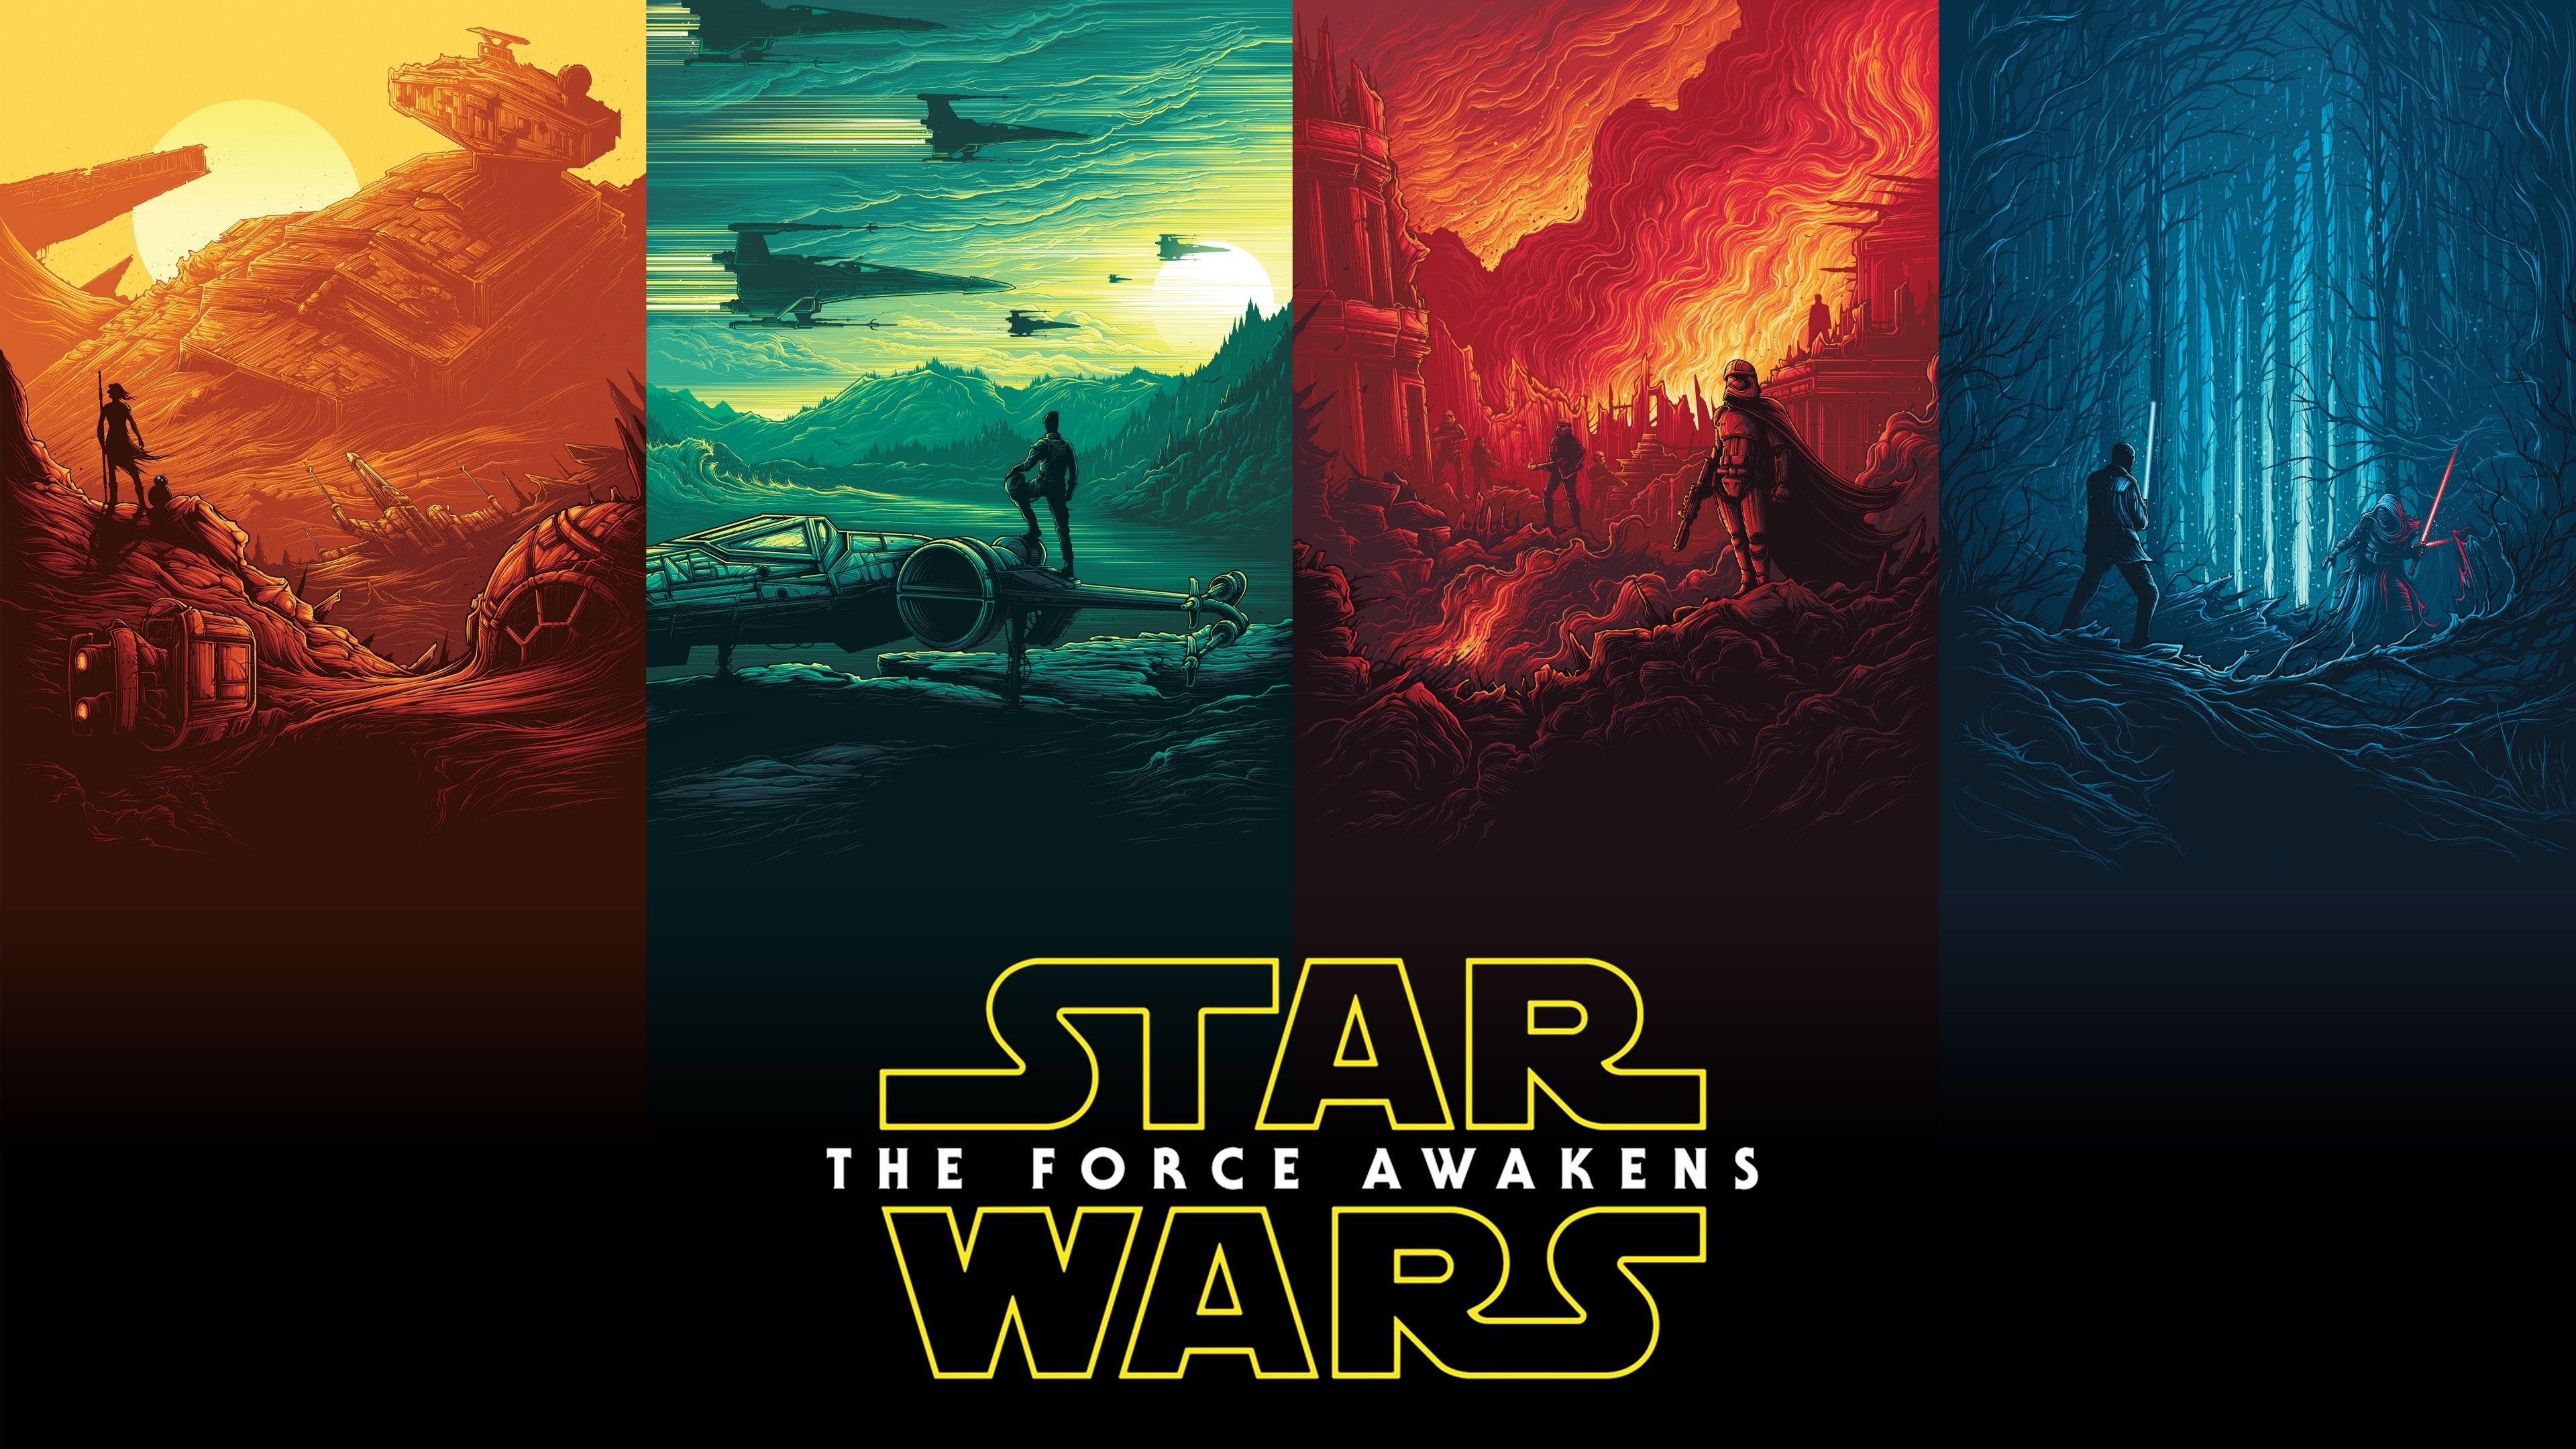 #Star Wars: The Force Awakens, #movie poster, #Star Wars, #Film posters wallpaper